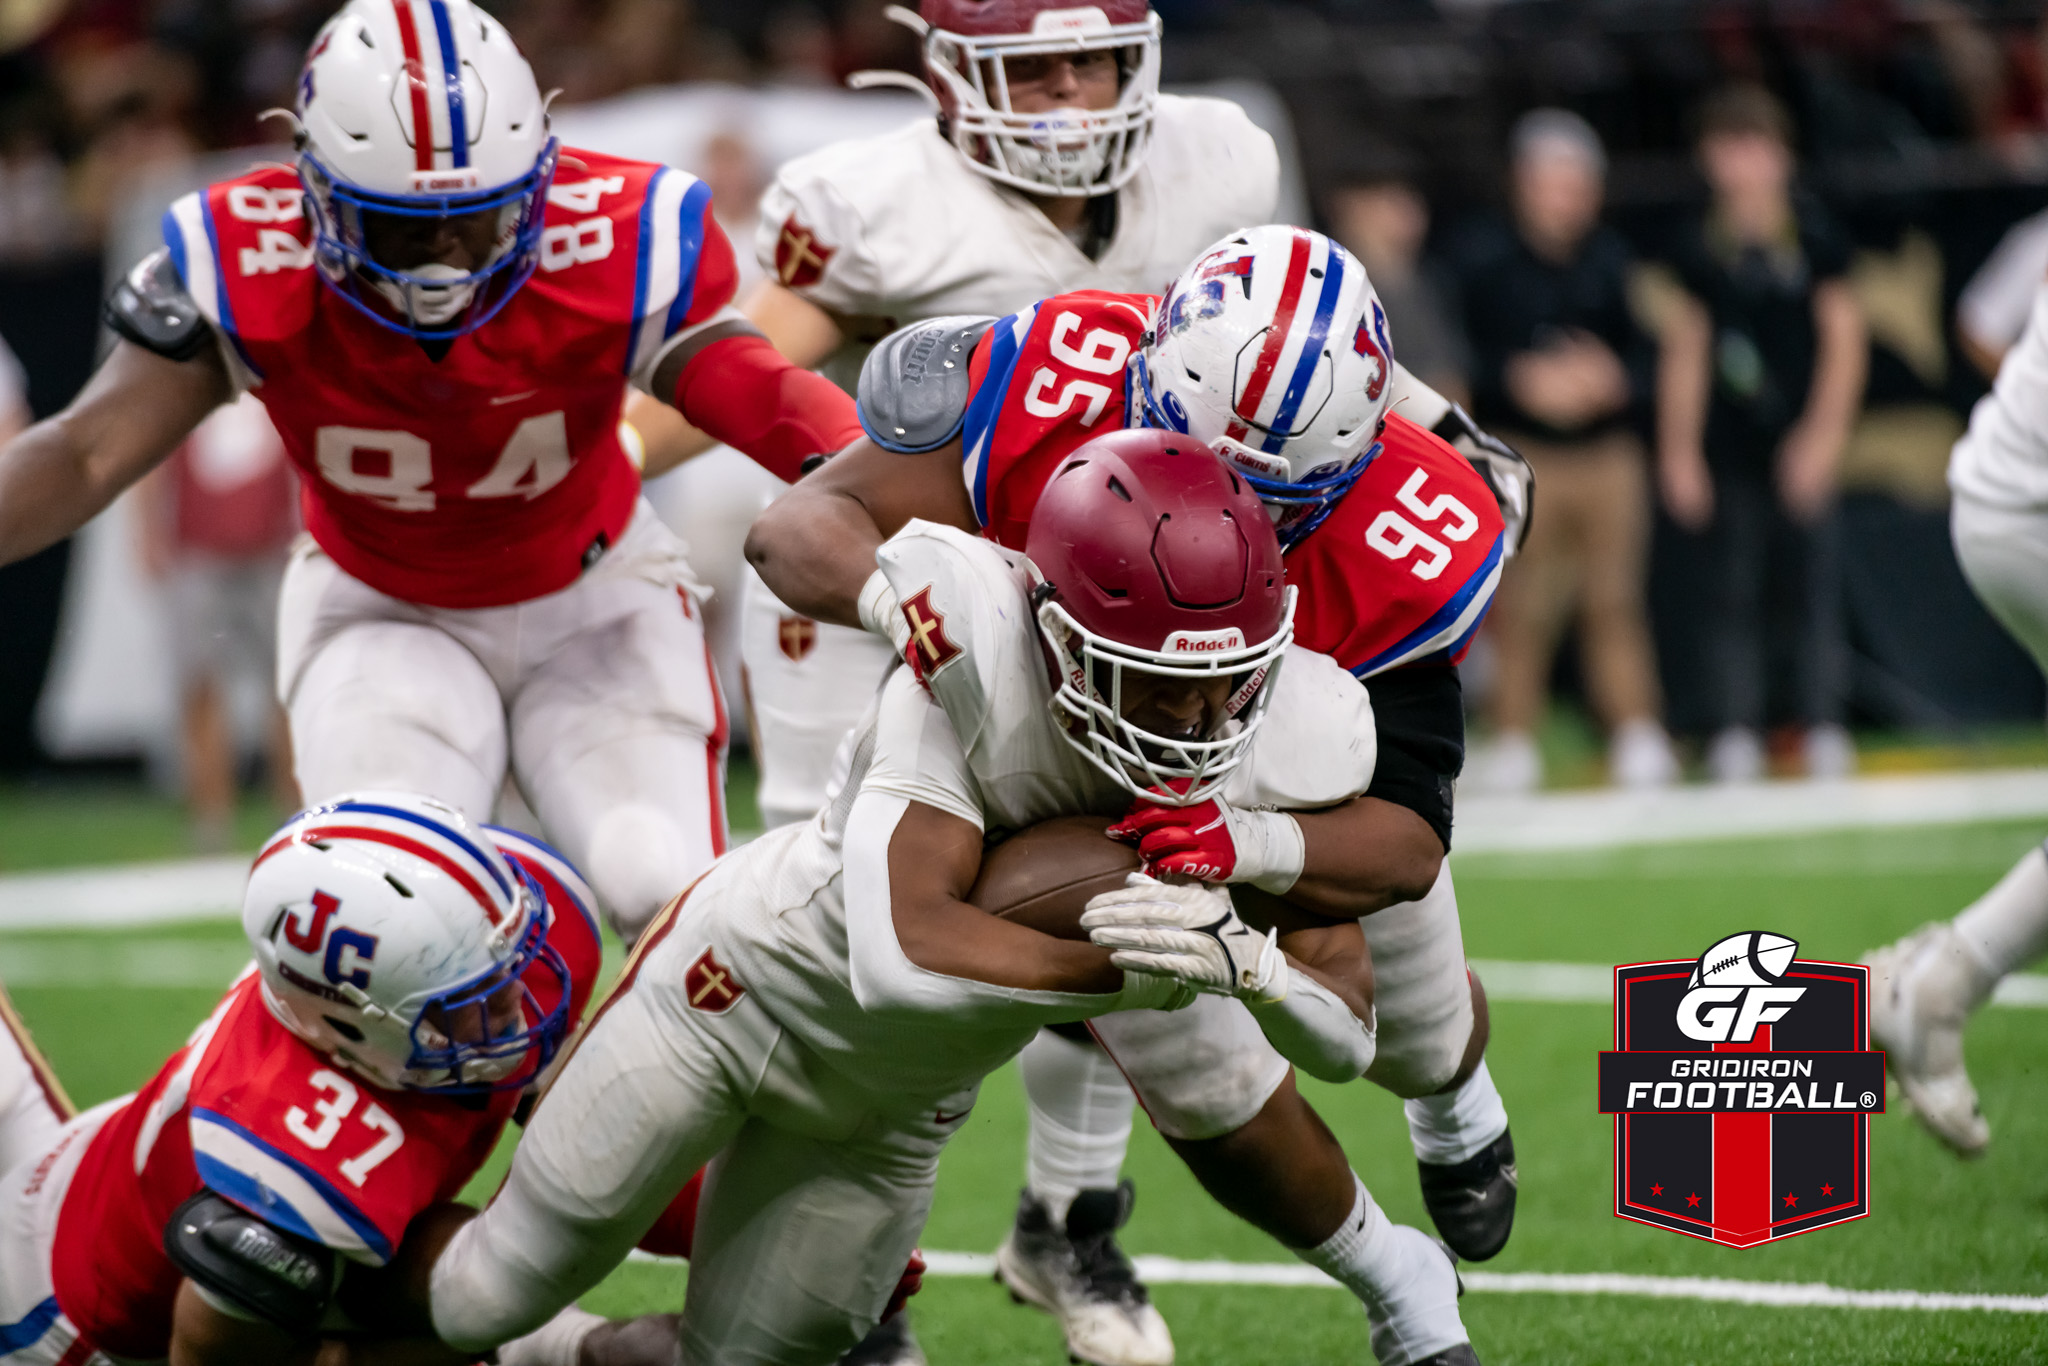 John Curtis Dominates Brother Martin 23-0 in Division I (Select) State Championship